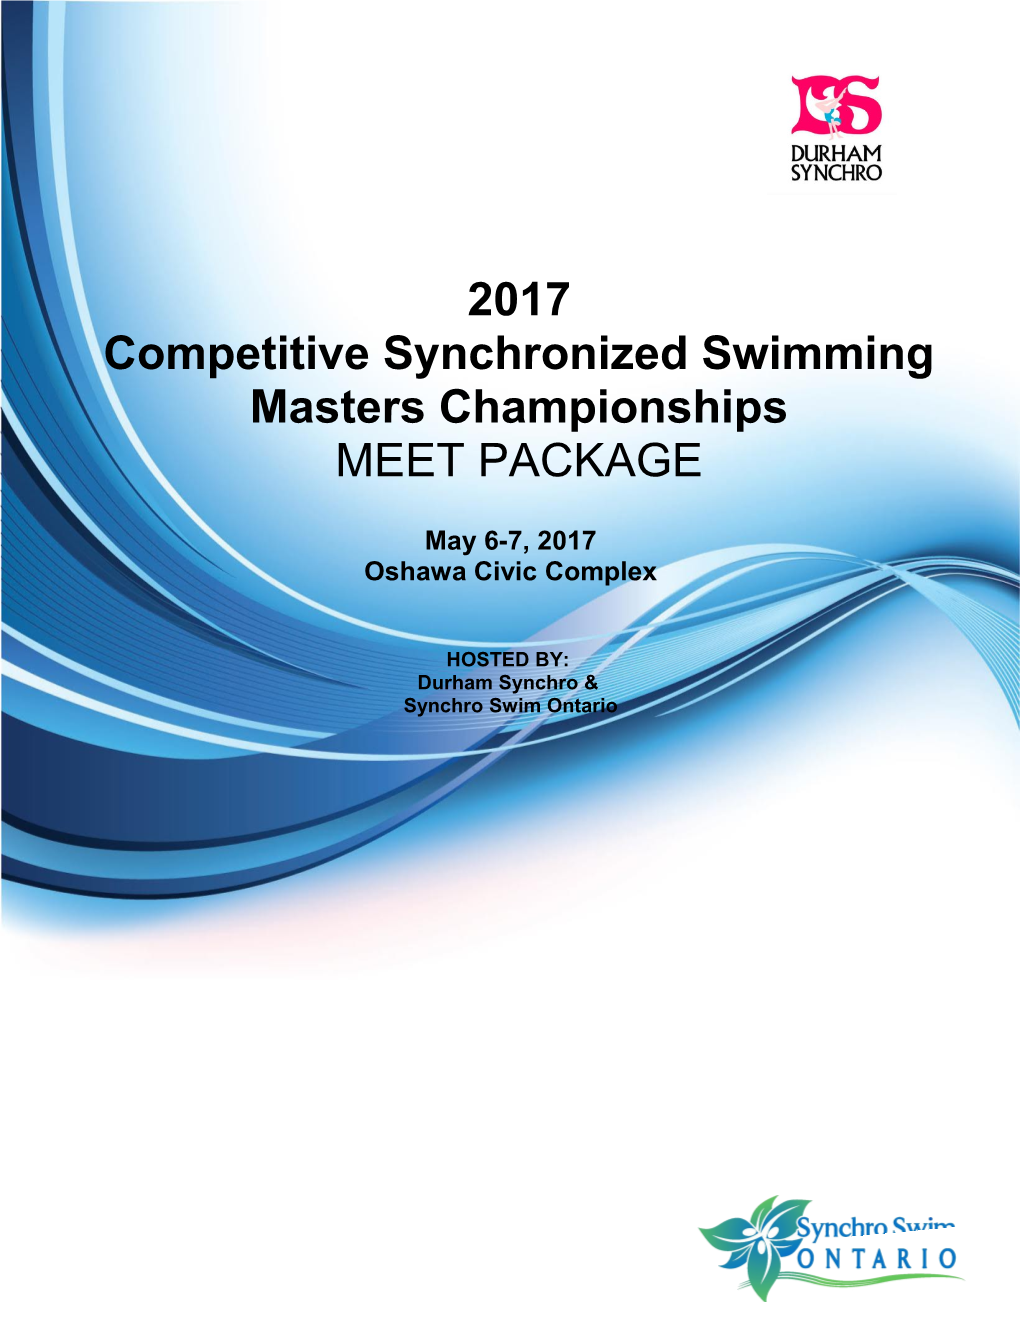 Competitive Synchronized Swimming